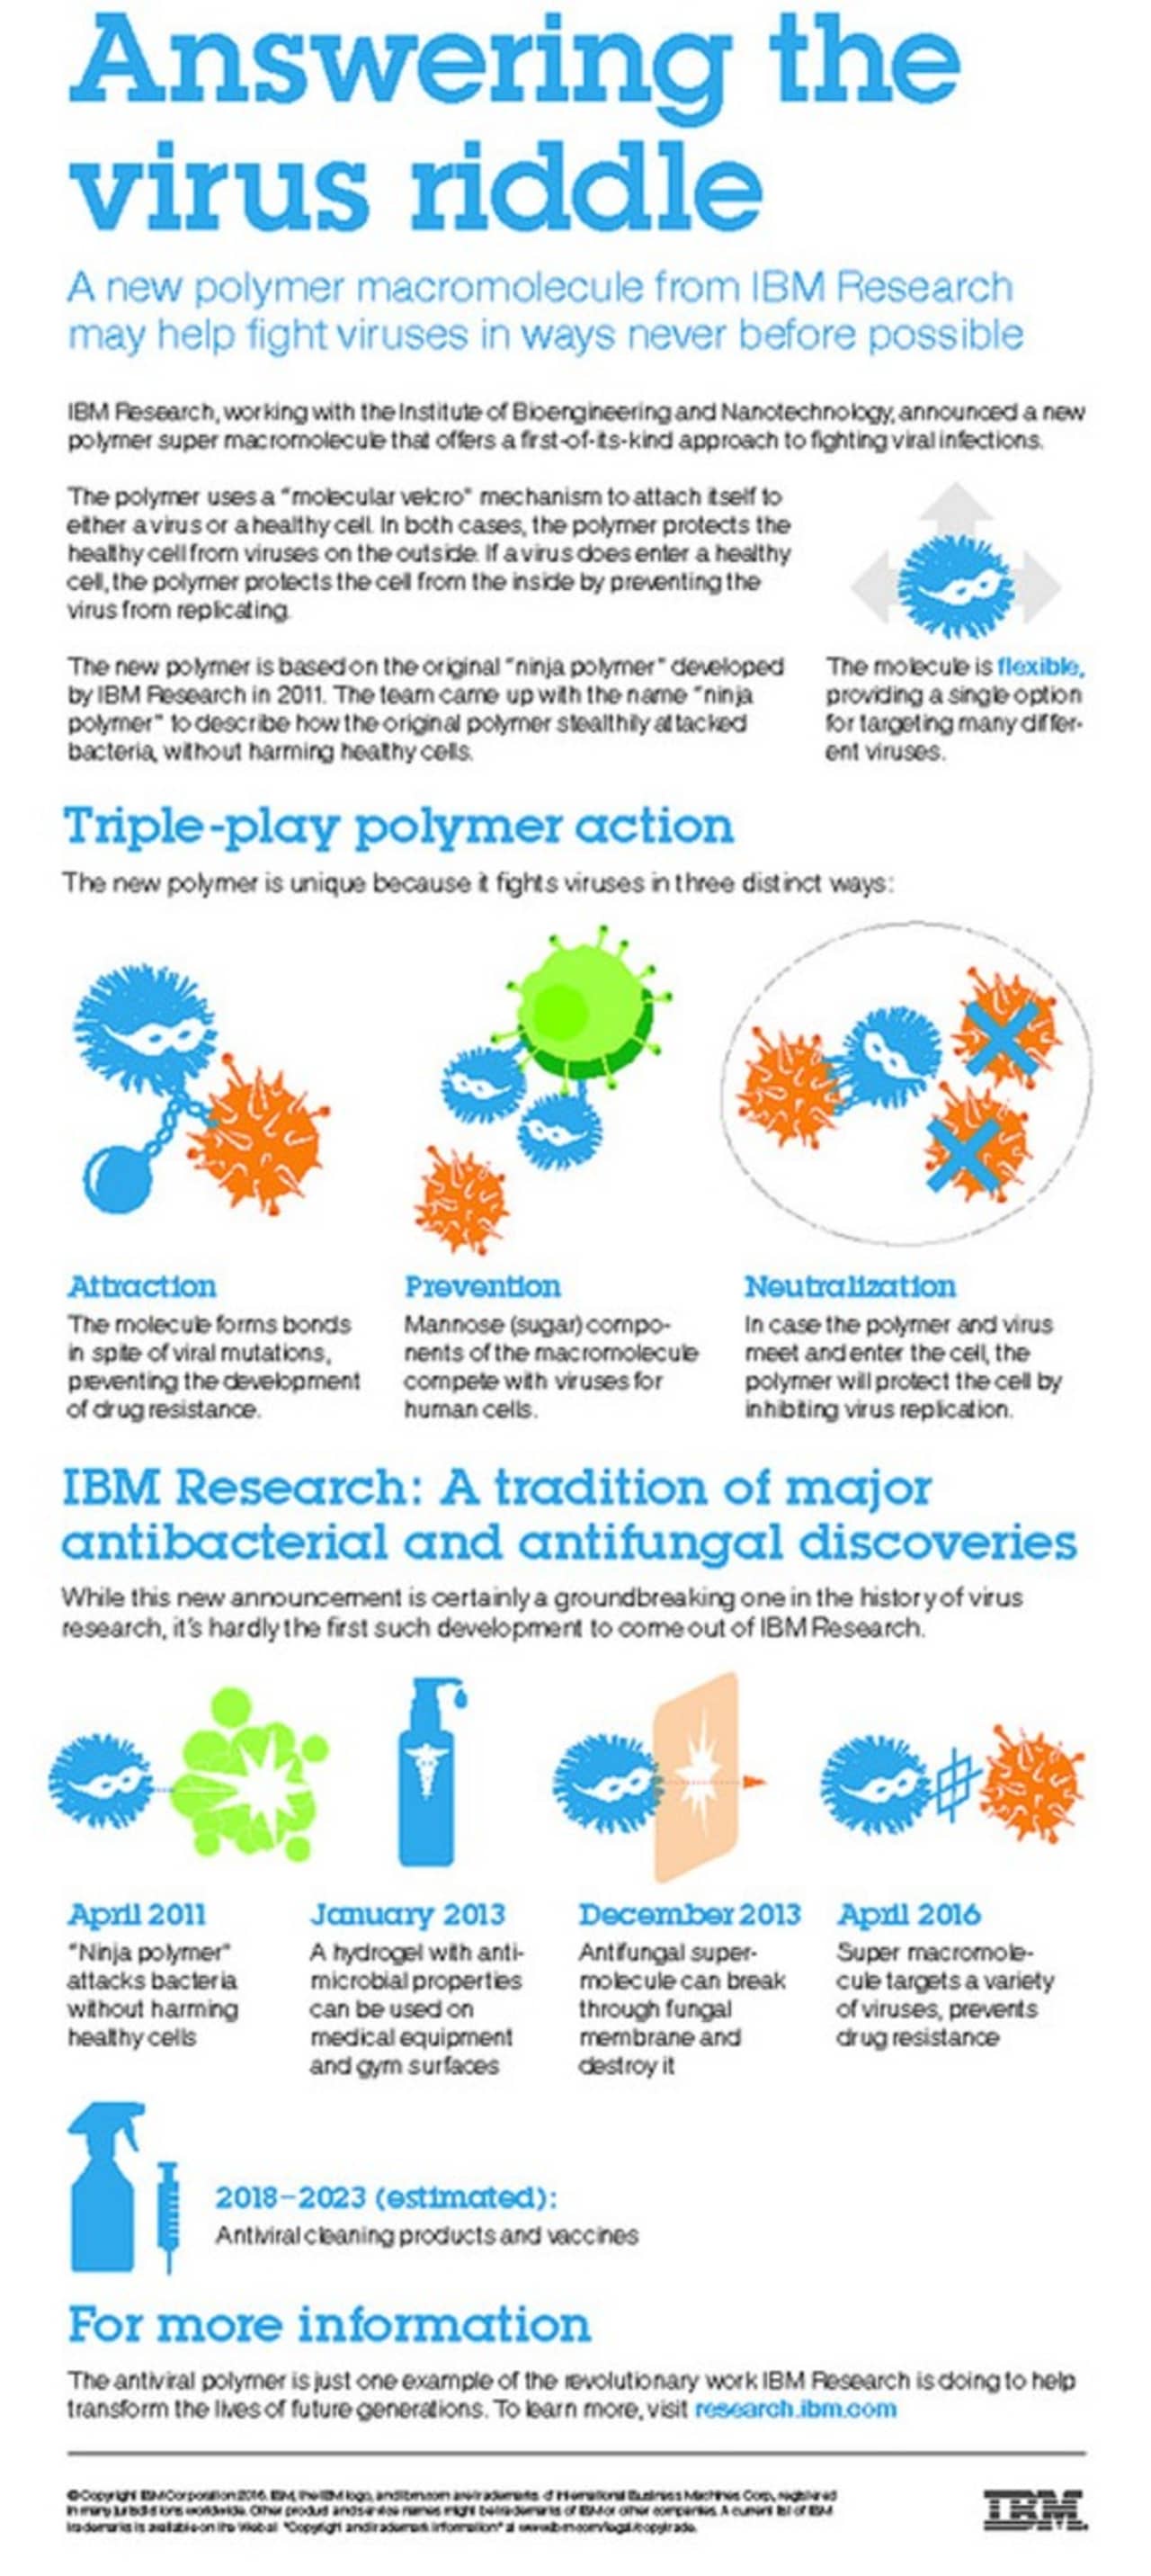 IBM has announced a new chemical compound that can kill viruses.